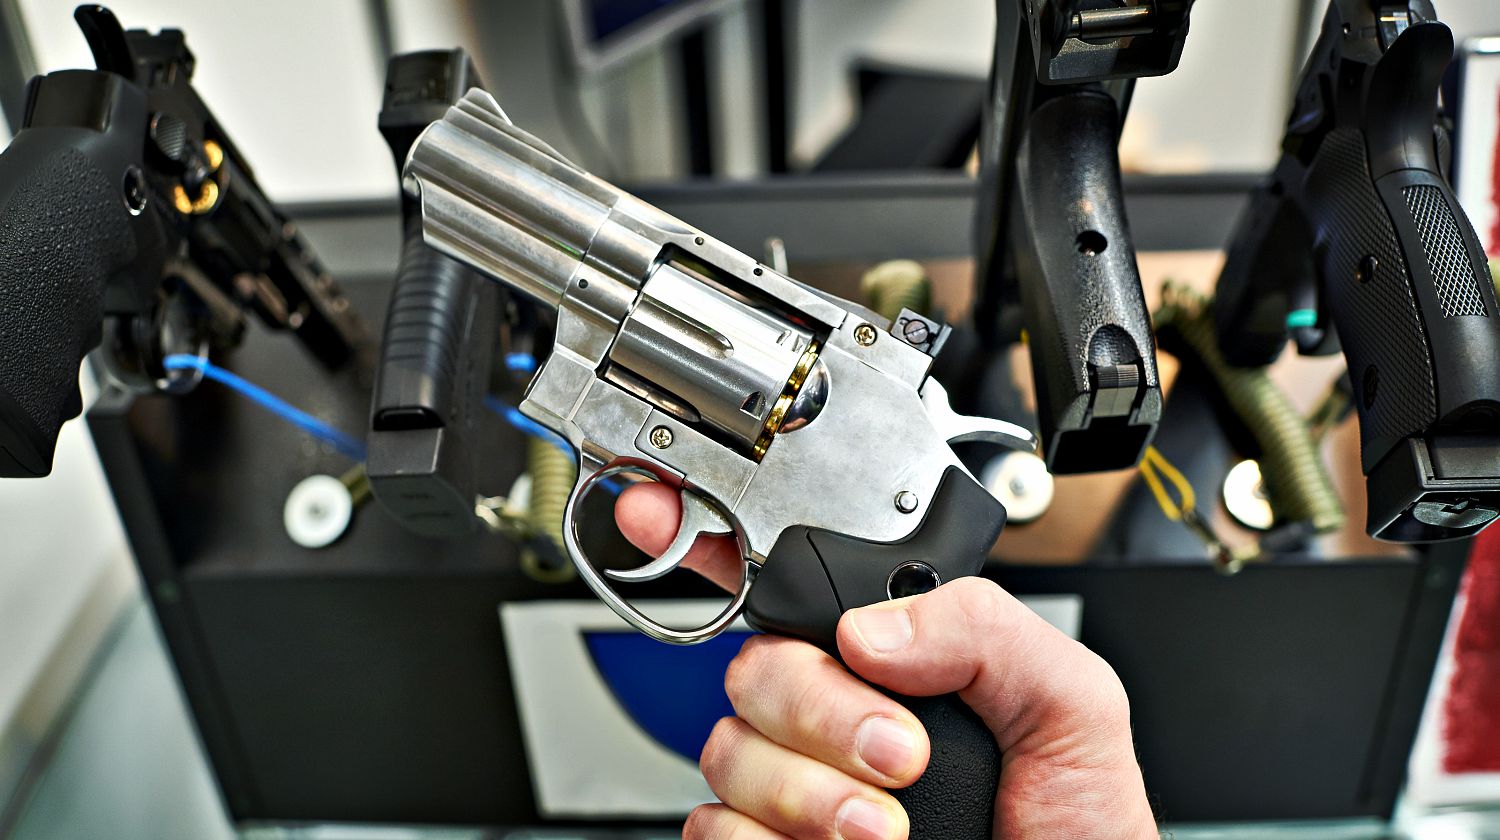 Featured | Revolver dan wesson in the hand of the buyer in the arms store | What To Look For When Buying New Guns For First Time Users